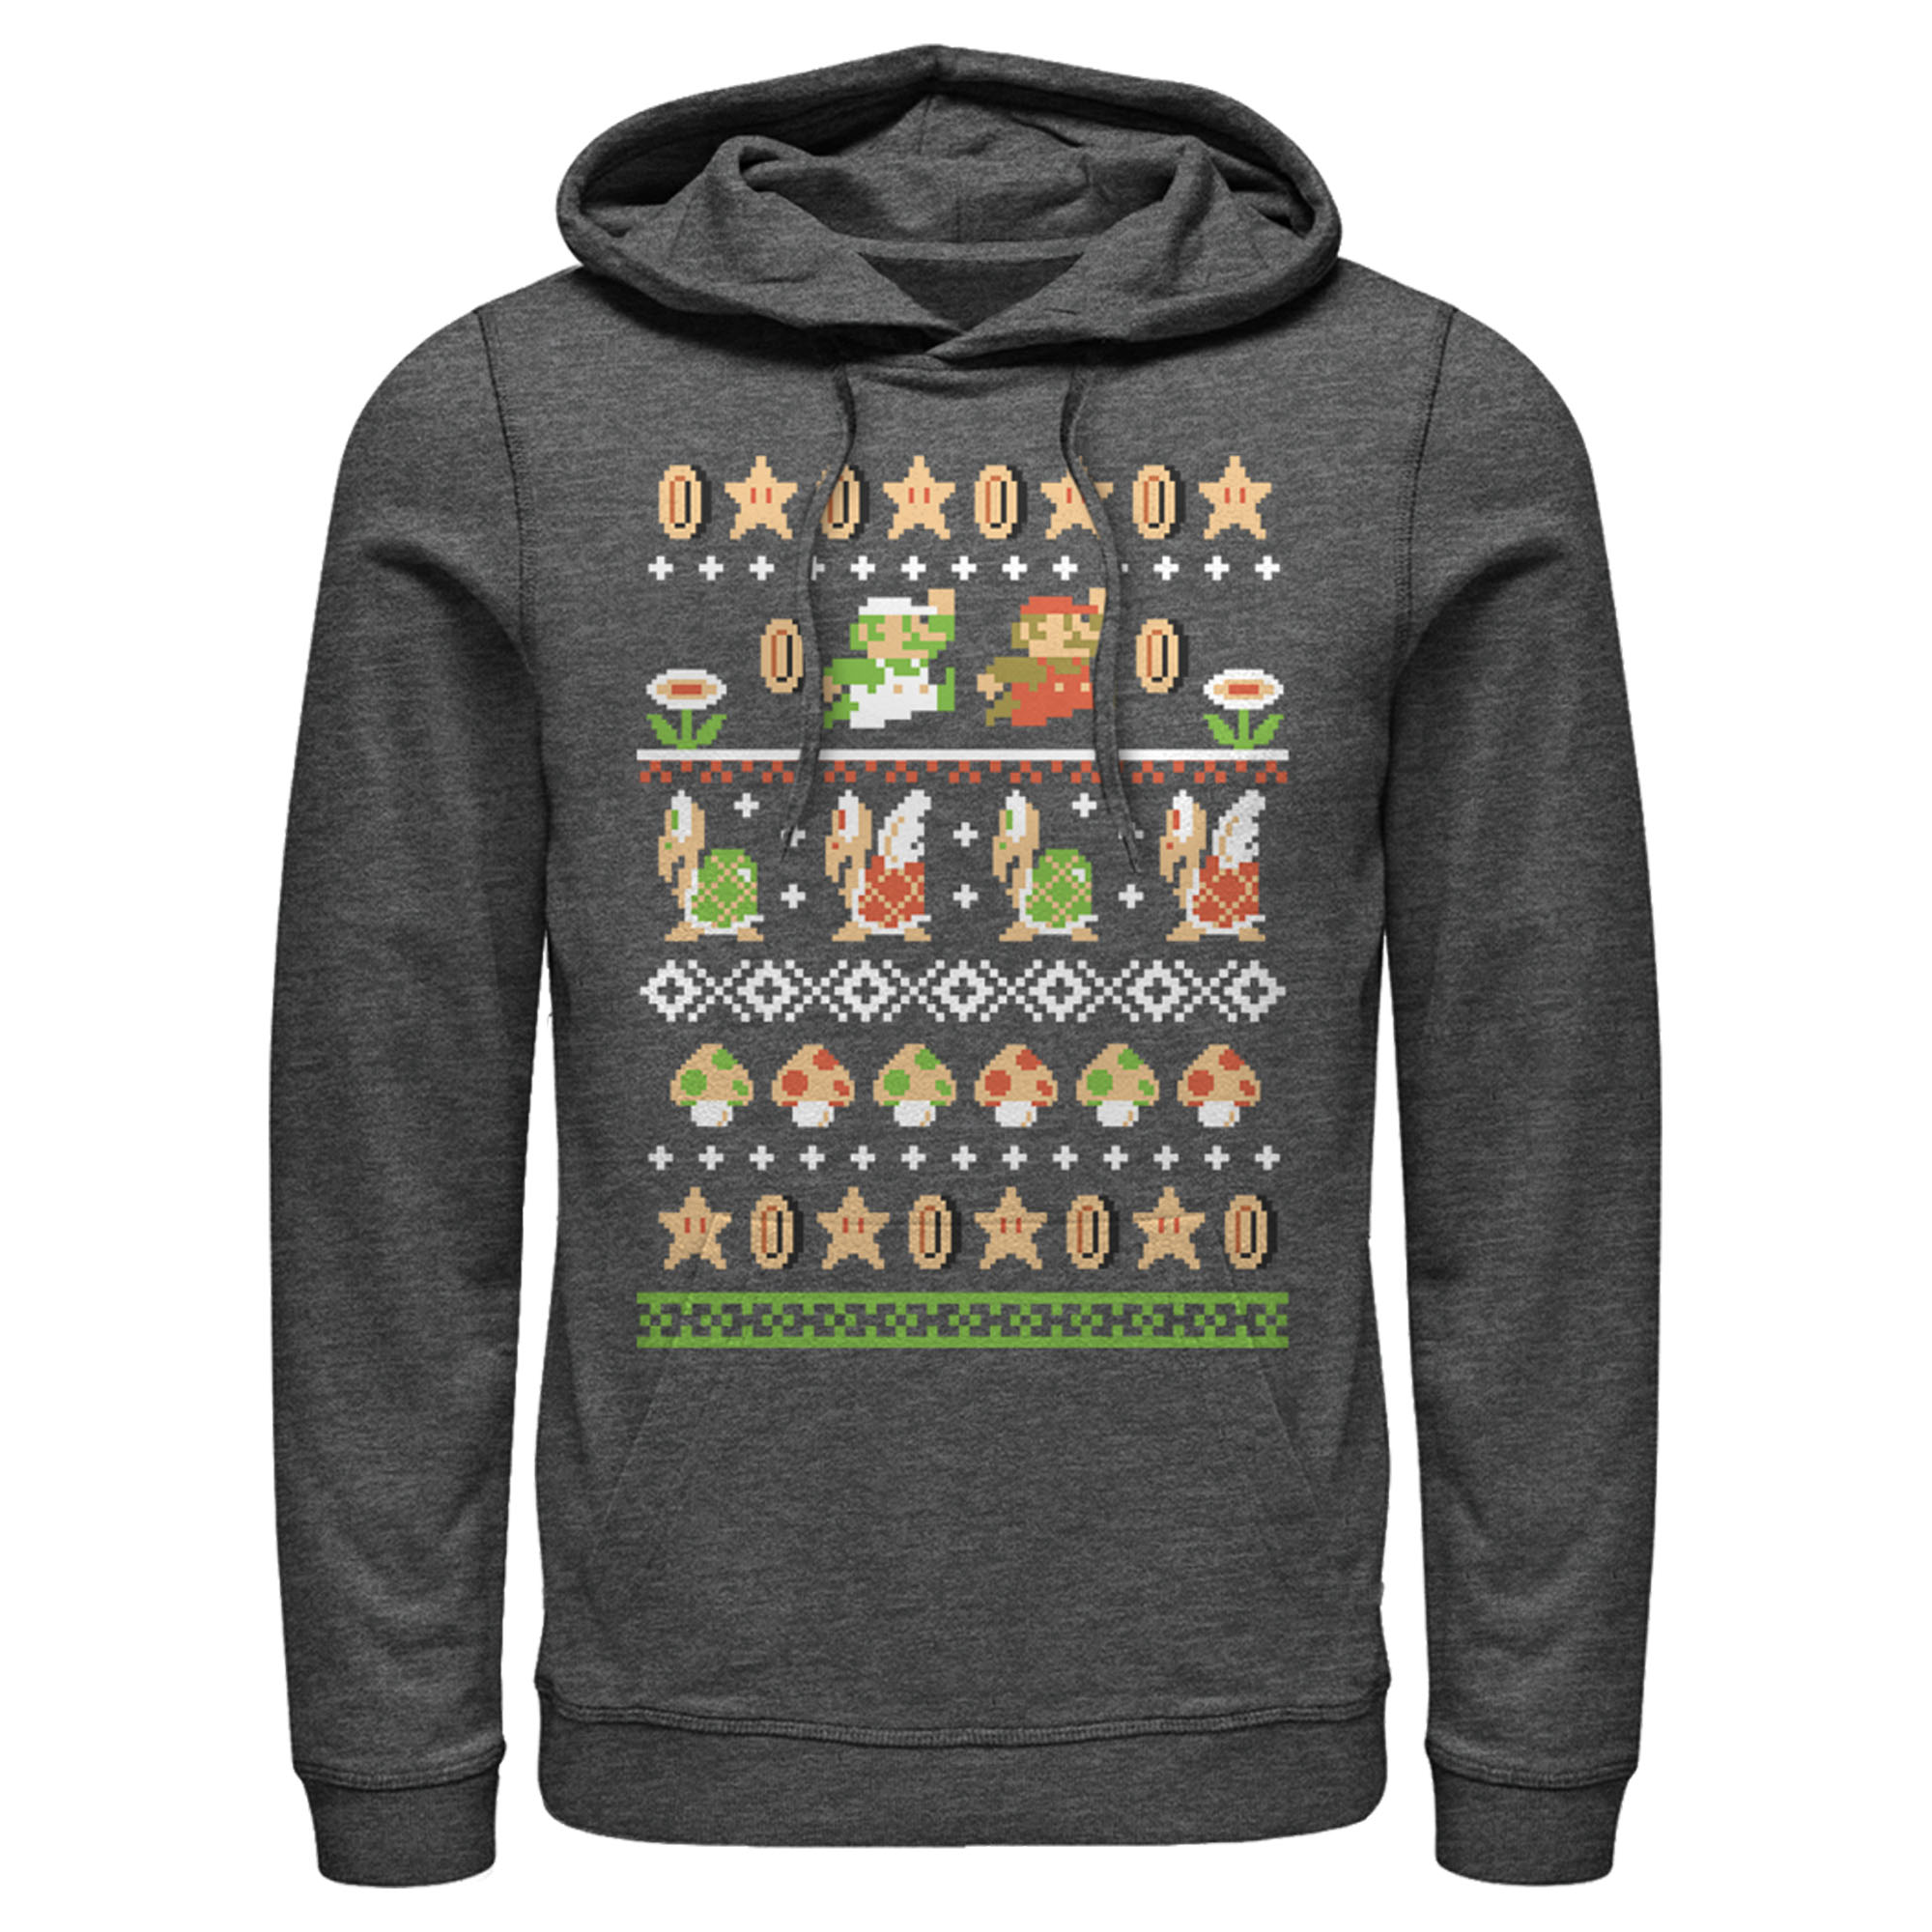 Men's Nintendo Super Mario Bros Pattern  Pull Over Hoodie Charcoal Heather Large - image 1 of 3